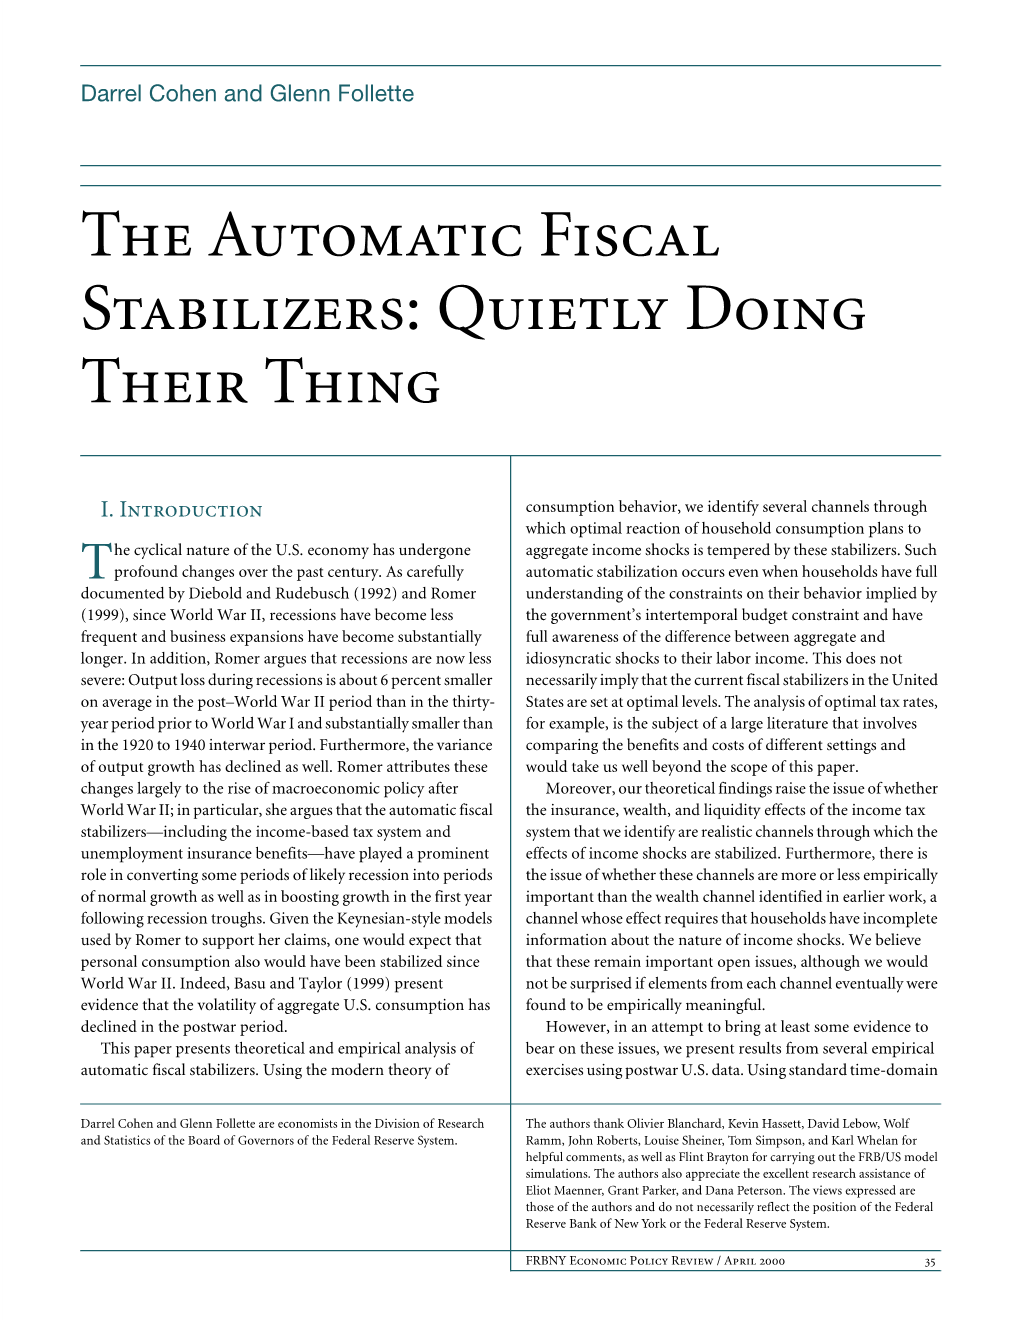 The Automatic Fiscal Stabilizers: Quietly Doing Their Thing